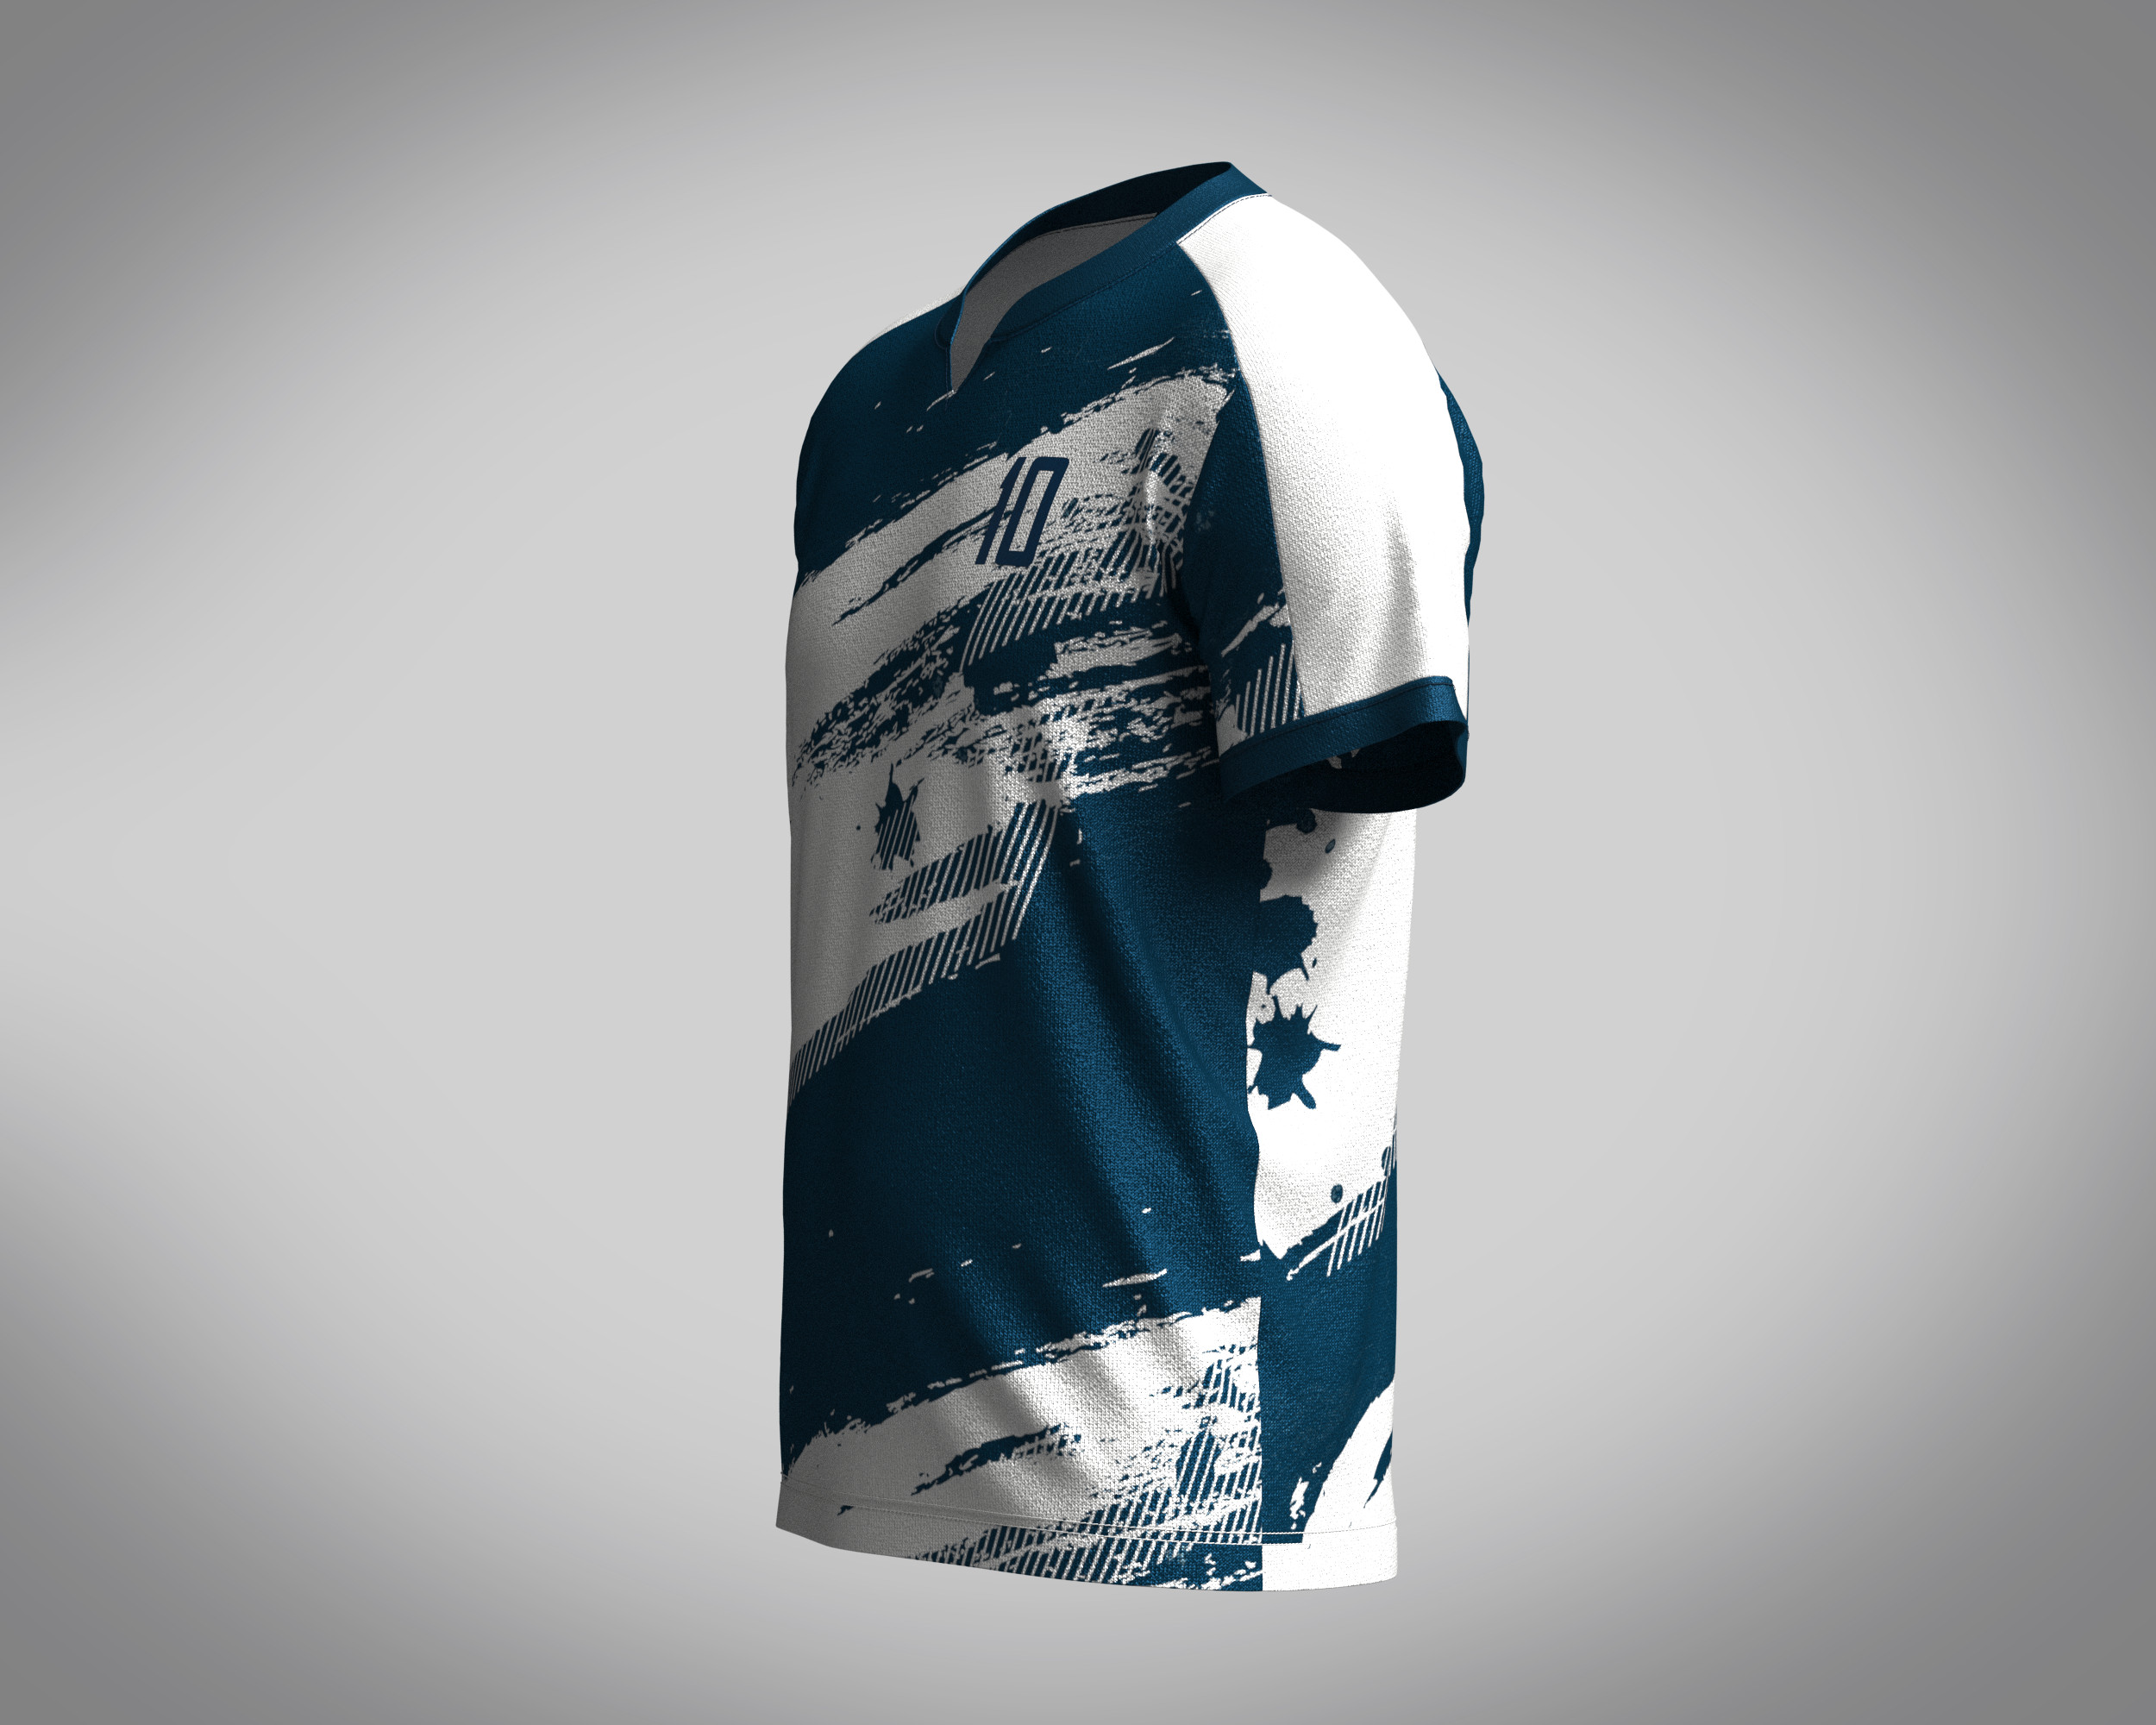 ArtStation - Soccer Football Sky Blue with white color Jersey